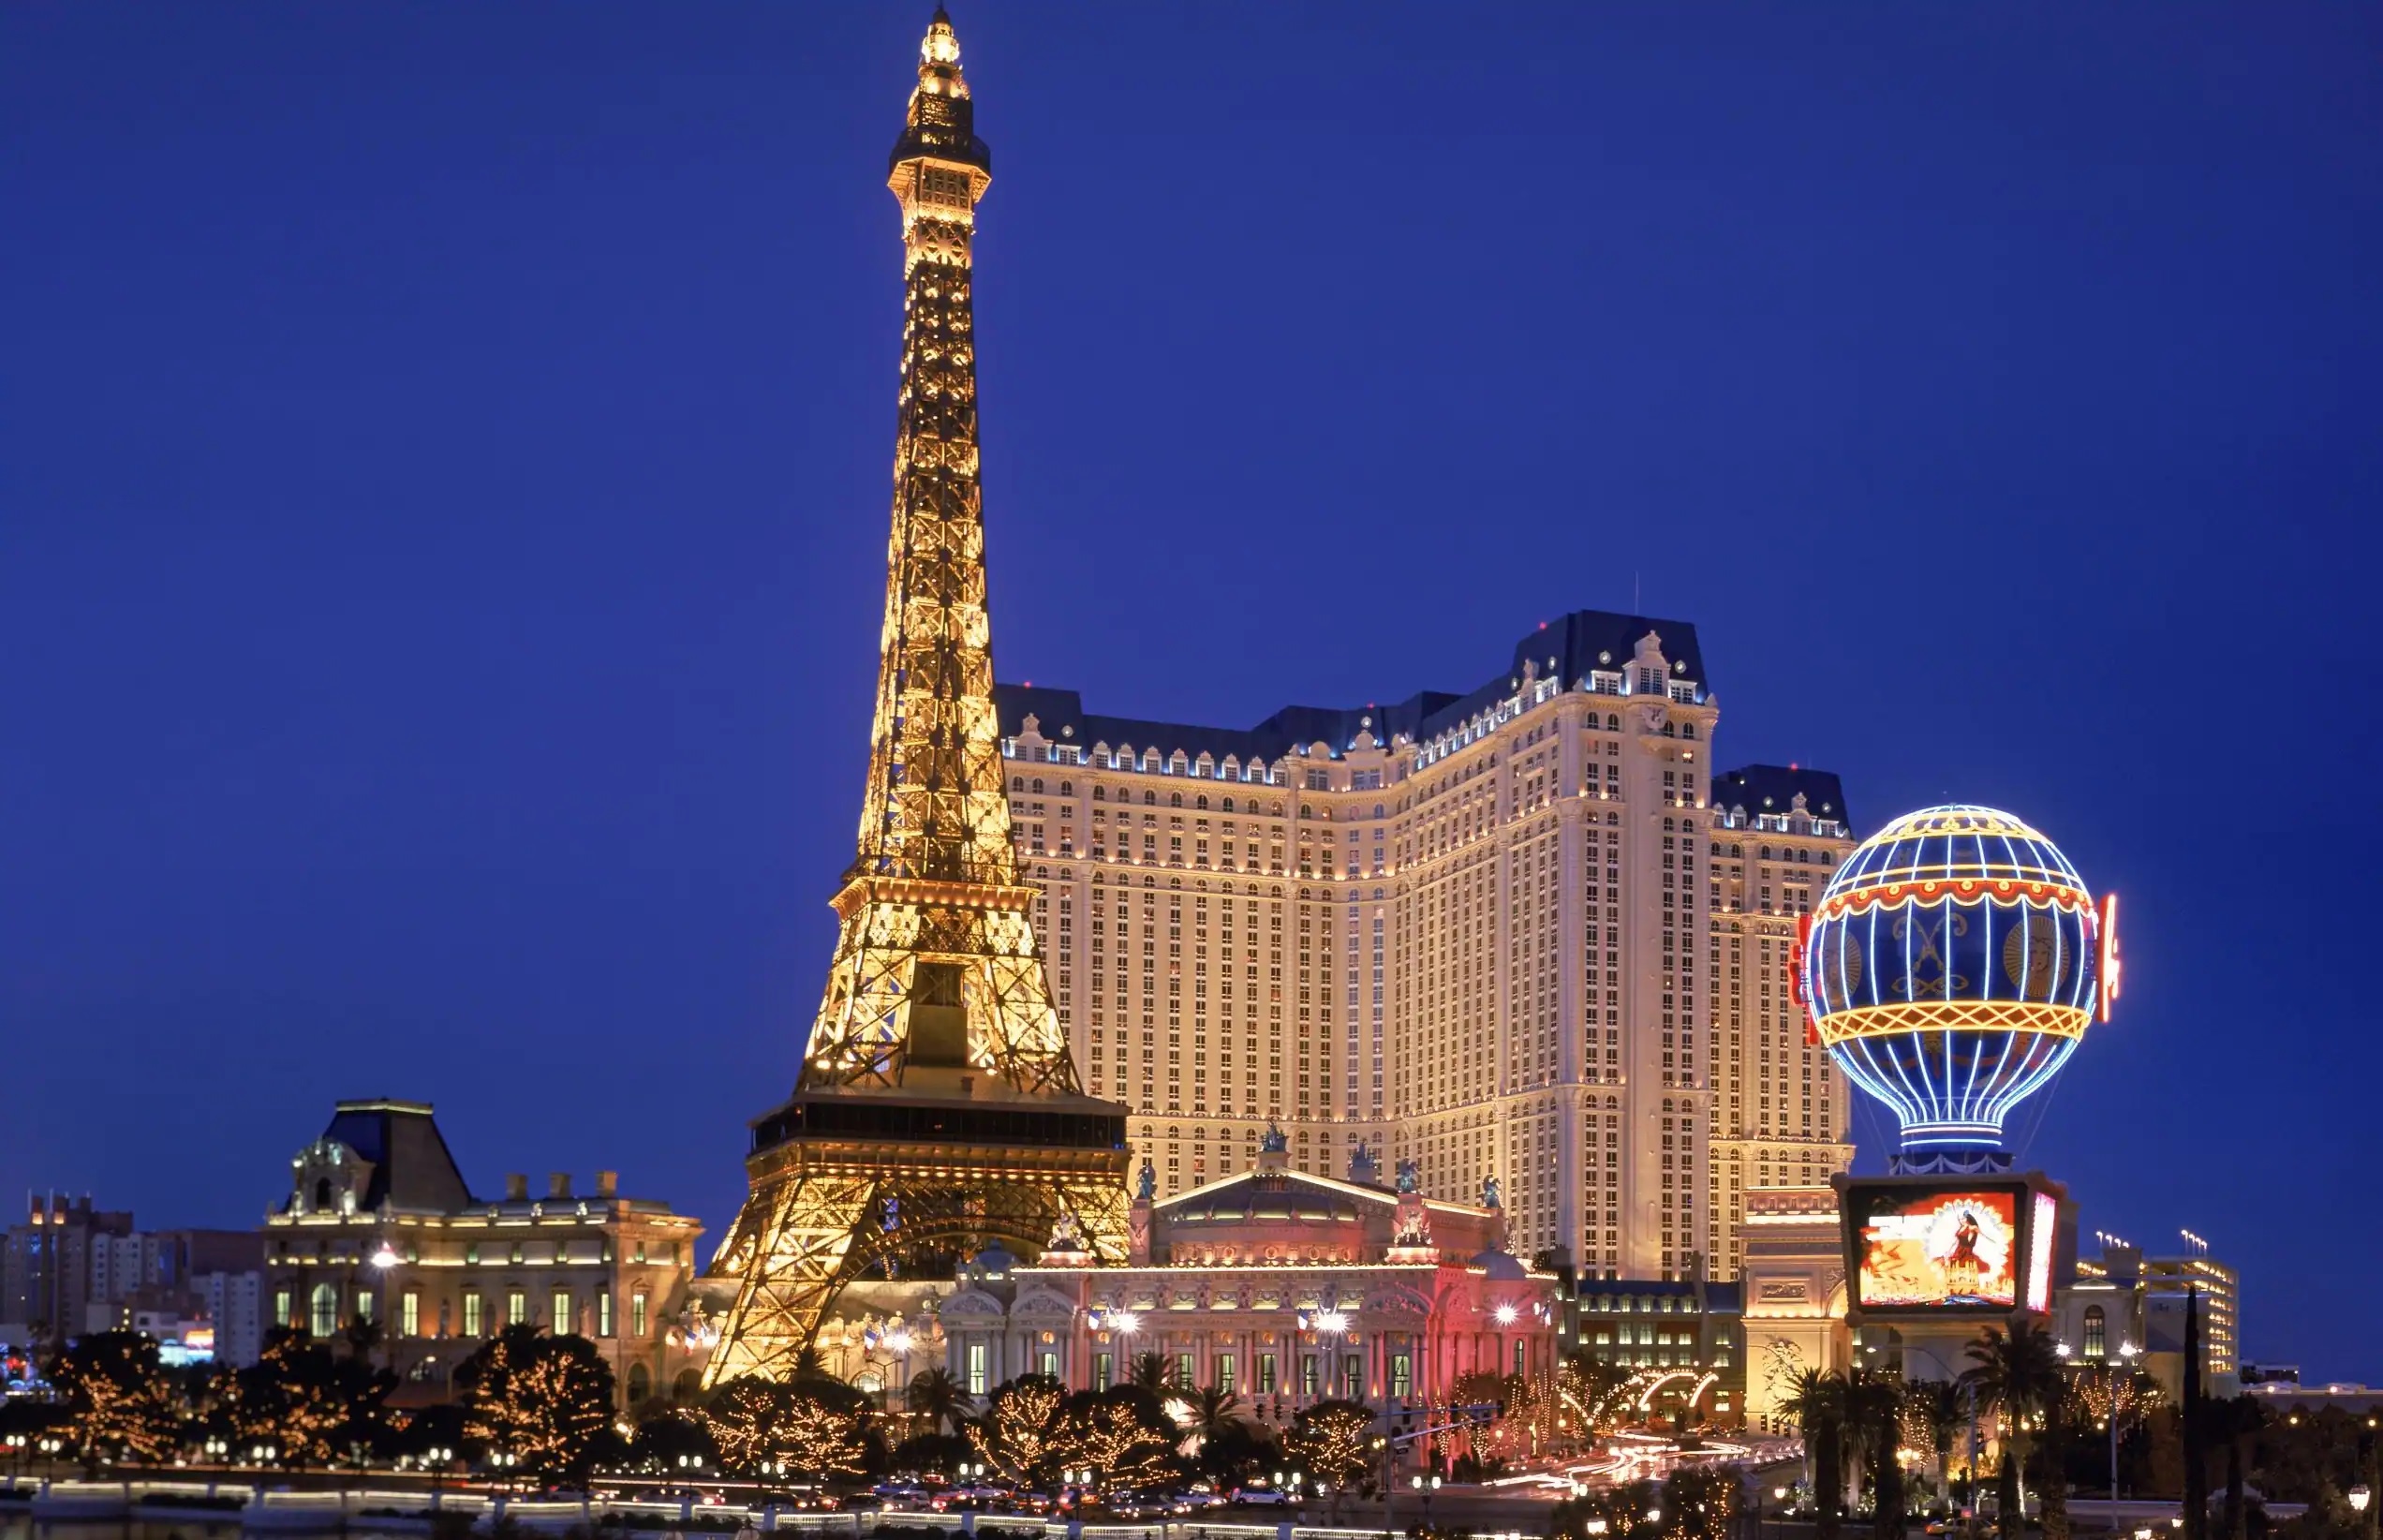 Paris Las Vegas on X: Here's to 21 years of love and light. We're